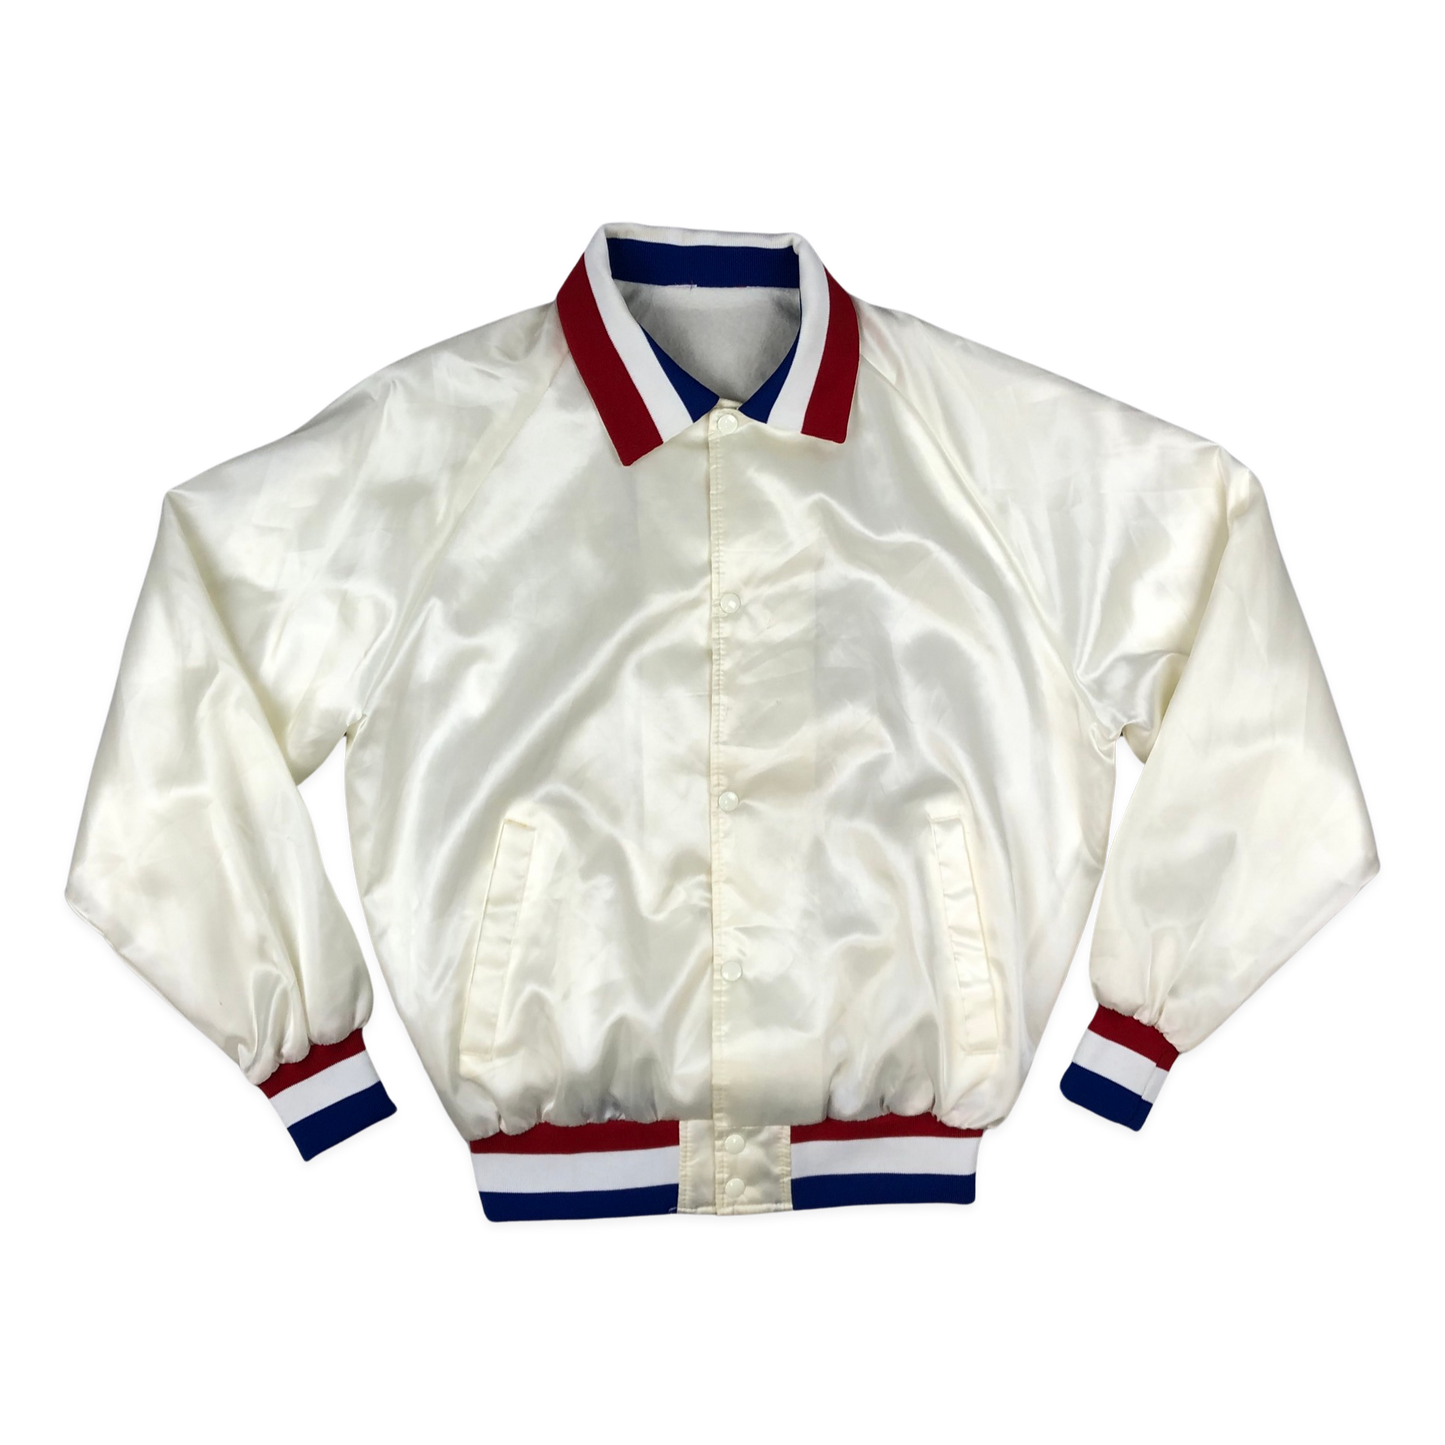 Vintage 80s "USA" White, Red, and Blue Varsity Windbreaker